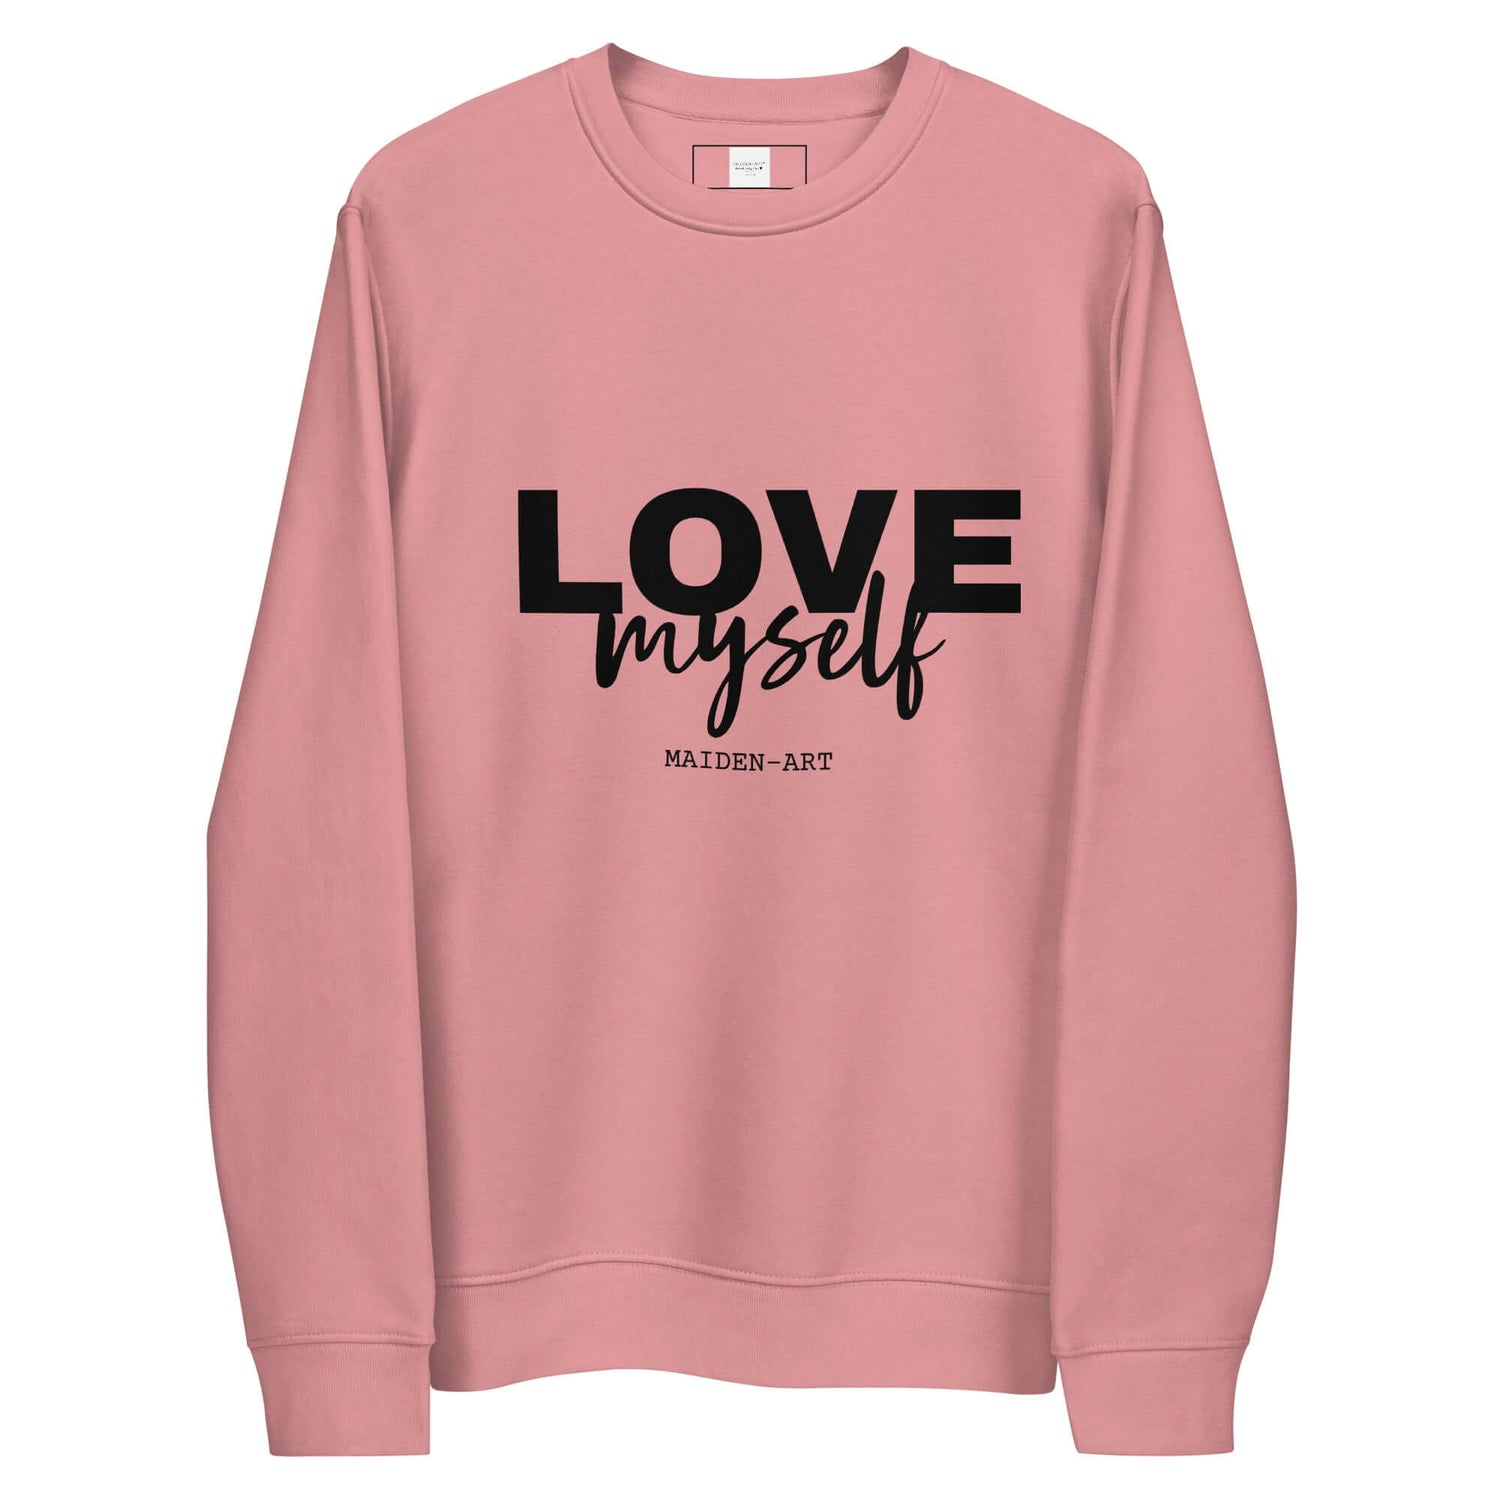 LOVE Myself - Unisex eco sweatshirt - Elevate your style with this unisex eco sweatshirt made of 85% organic ring-spun combed cotton and 15% recycled polyester. Featuring a chic, crisp look, this piece is perfect for both casual days and more dressed-up o